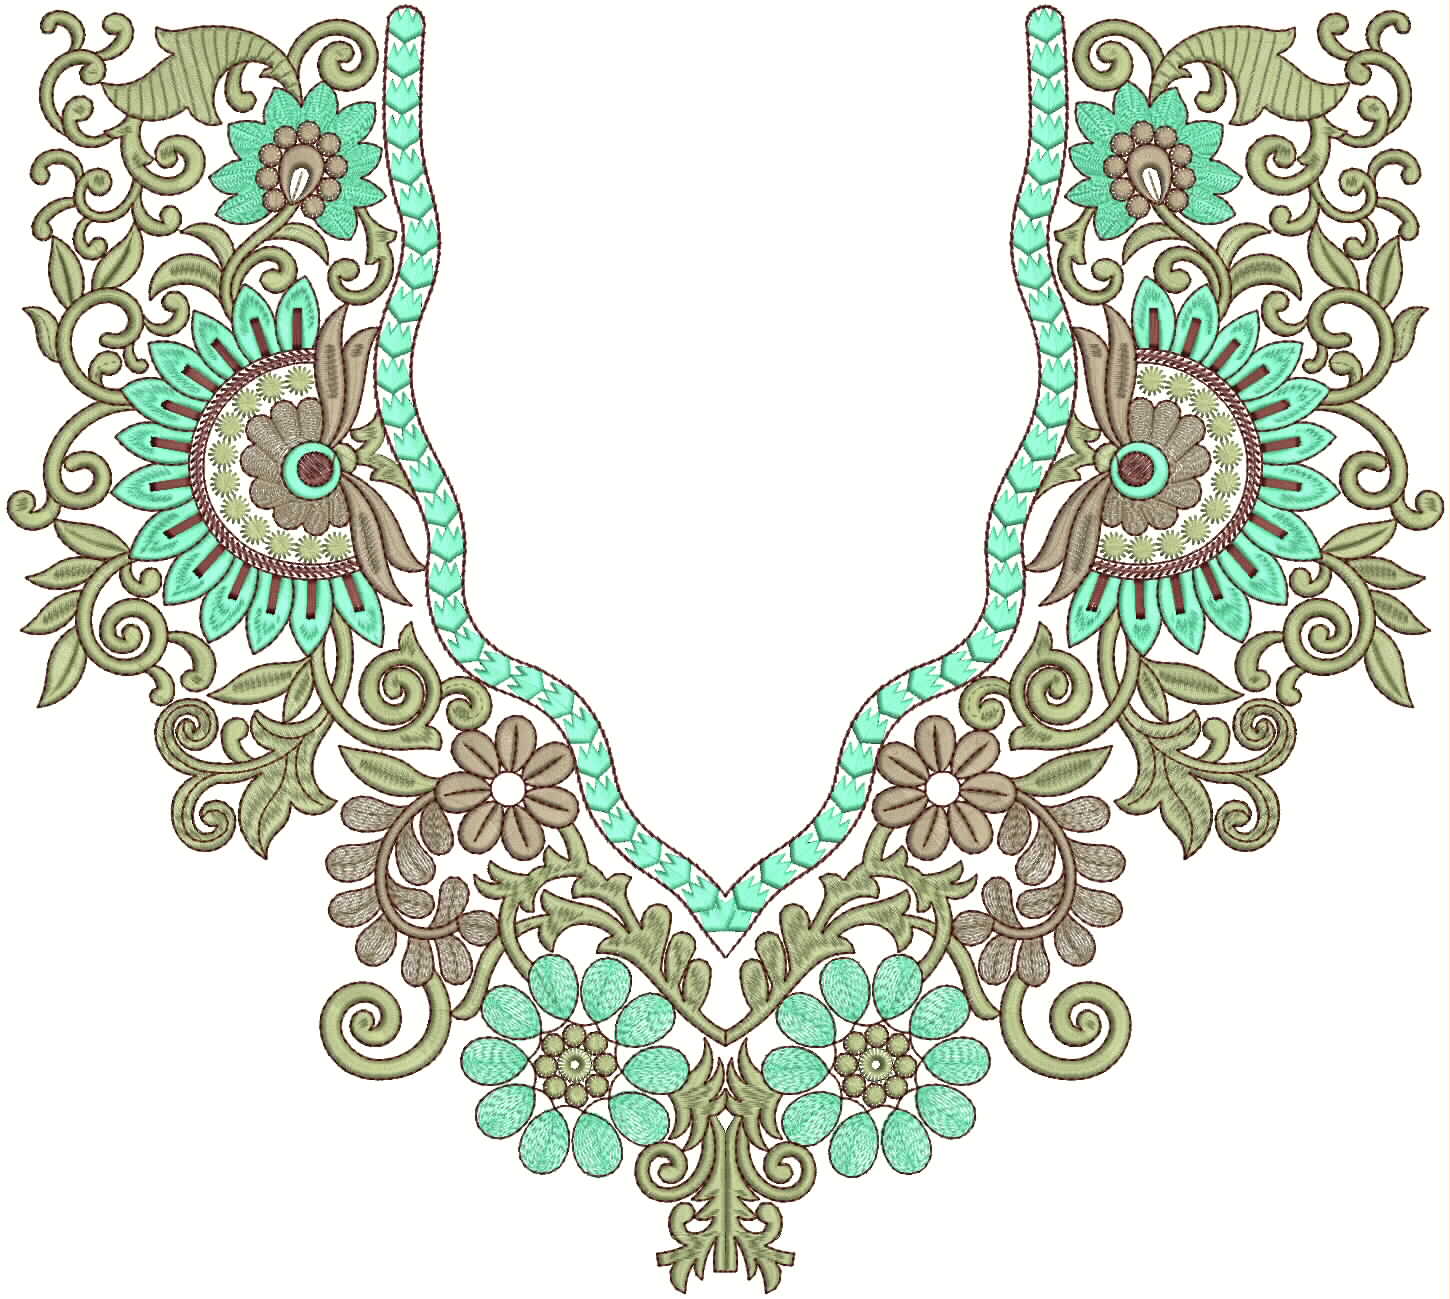 Ladies Neck Embroidery Designs Images Wallpaper hd